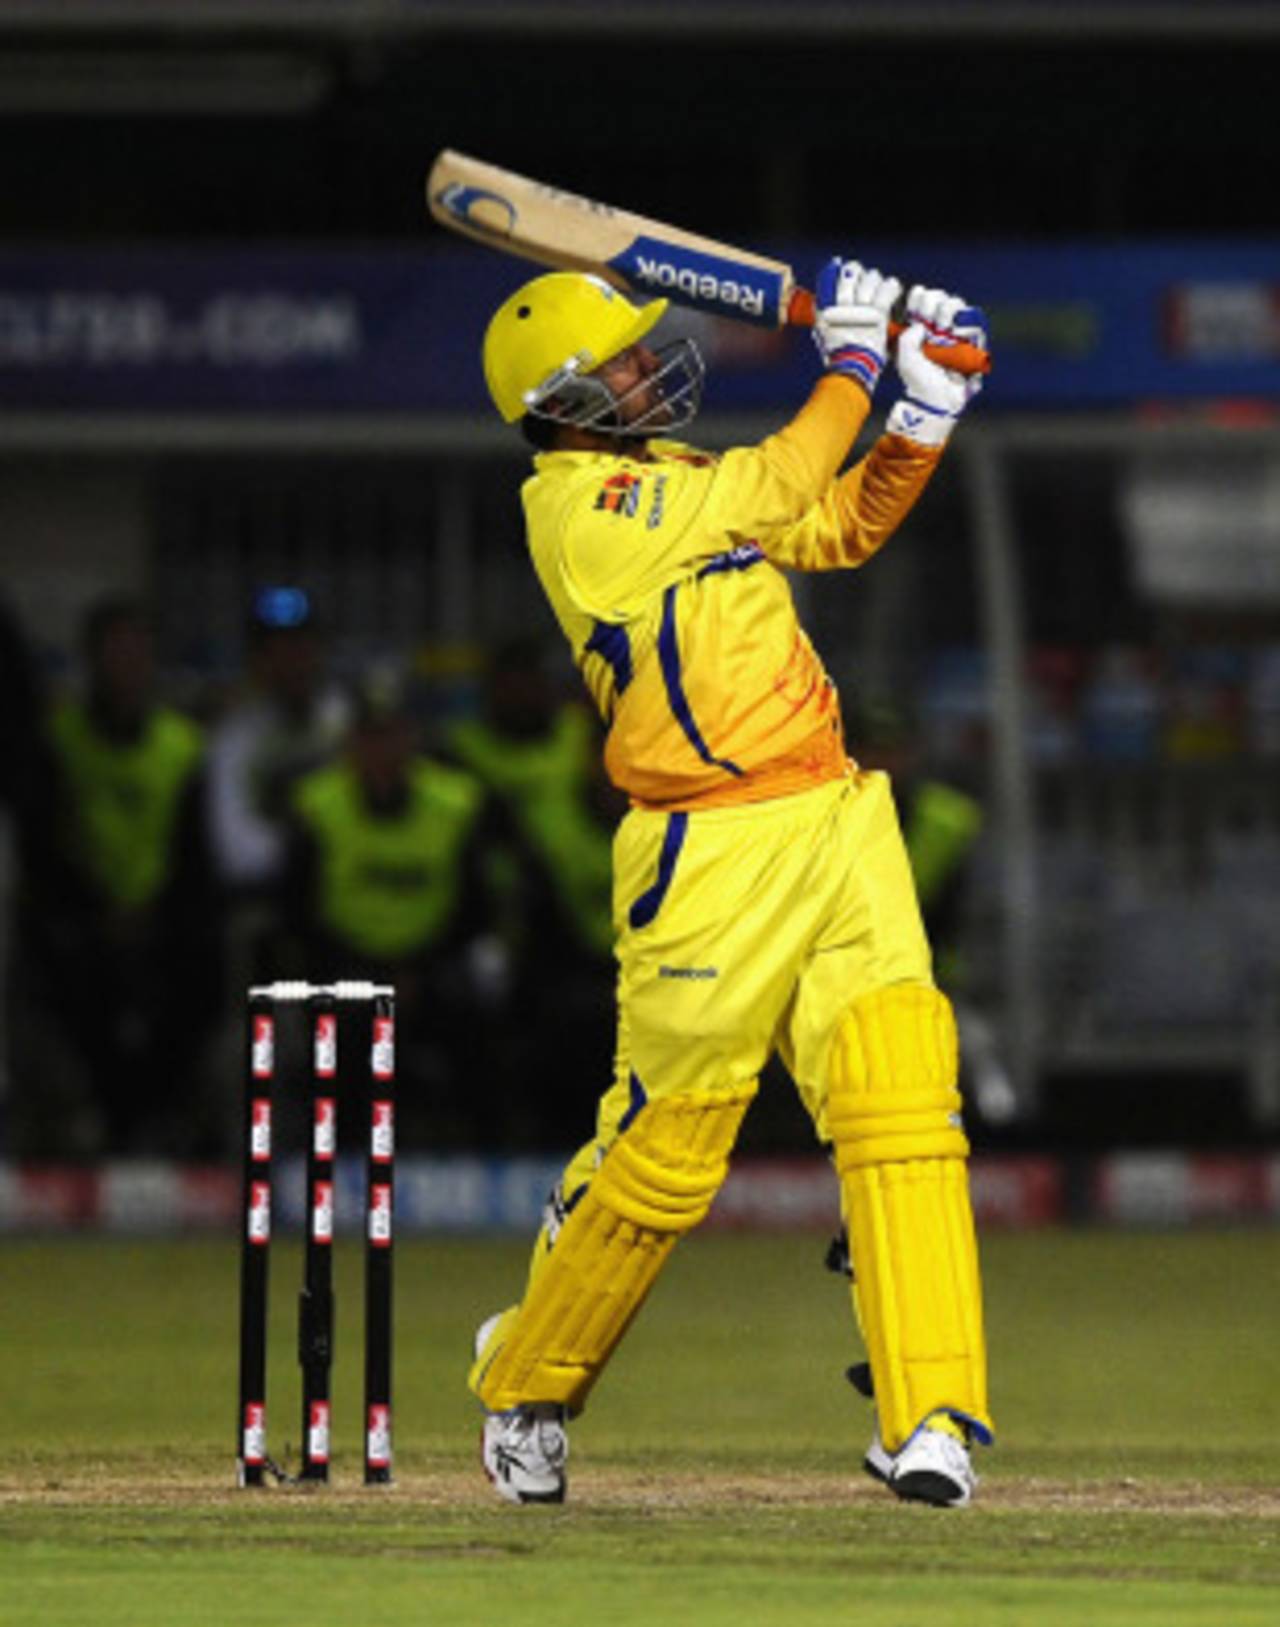 MS Dhoni swings one over deep midwicket, Warriors v Chennai Super Kings, Champions League T20, Port Elizabeth, September 22, 2010